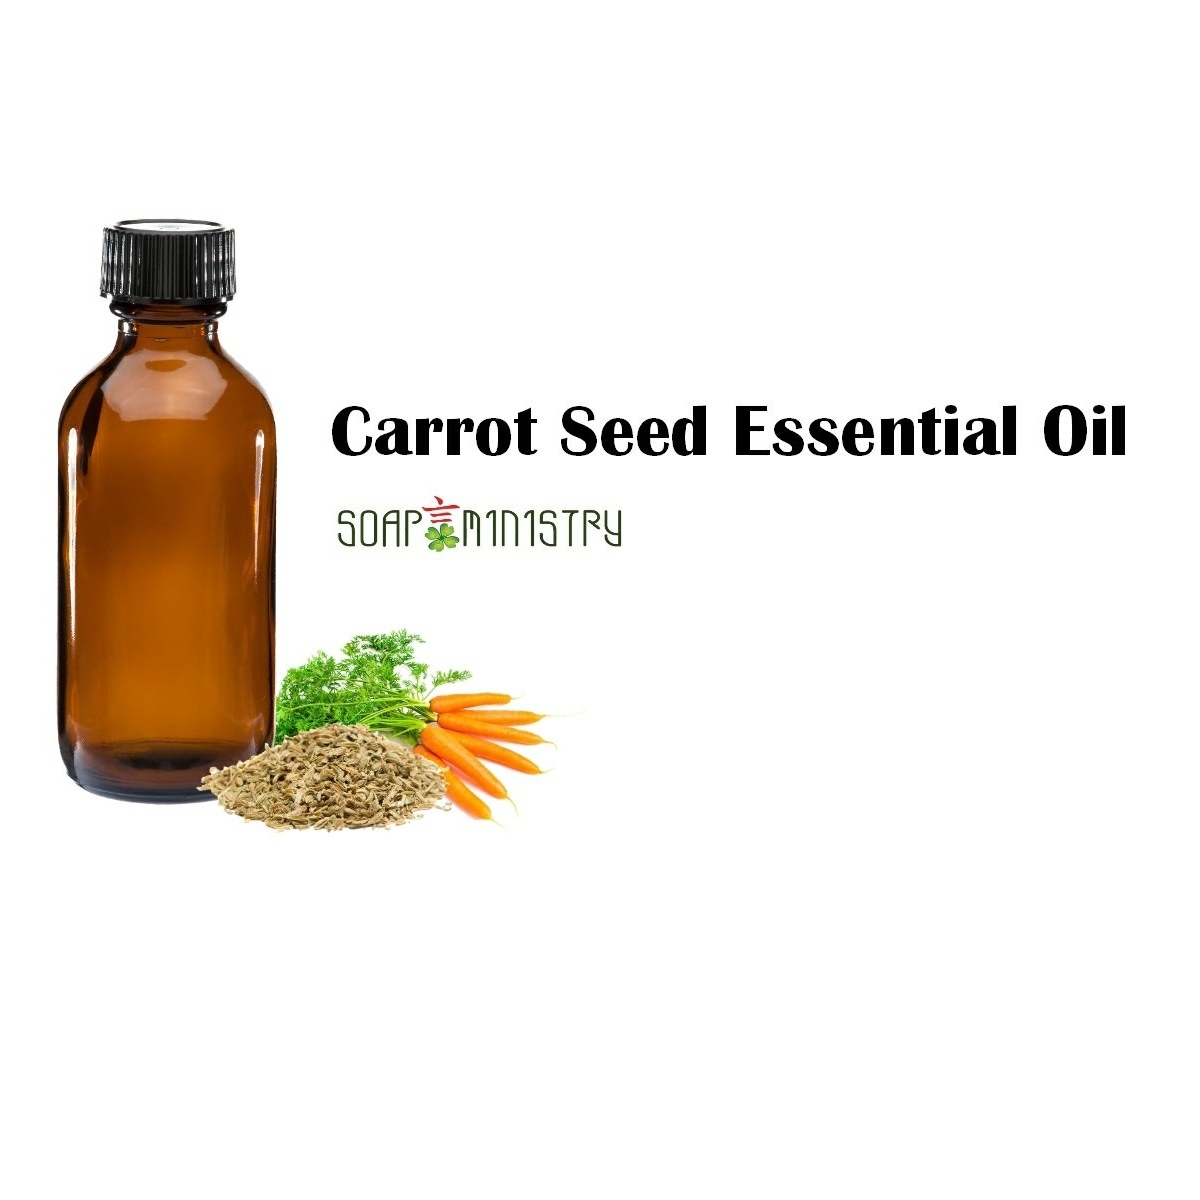 Carrot Seed Essential Oil 1L